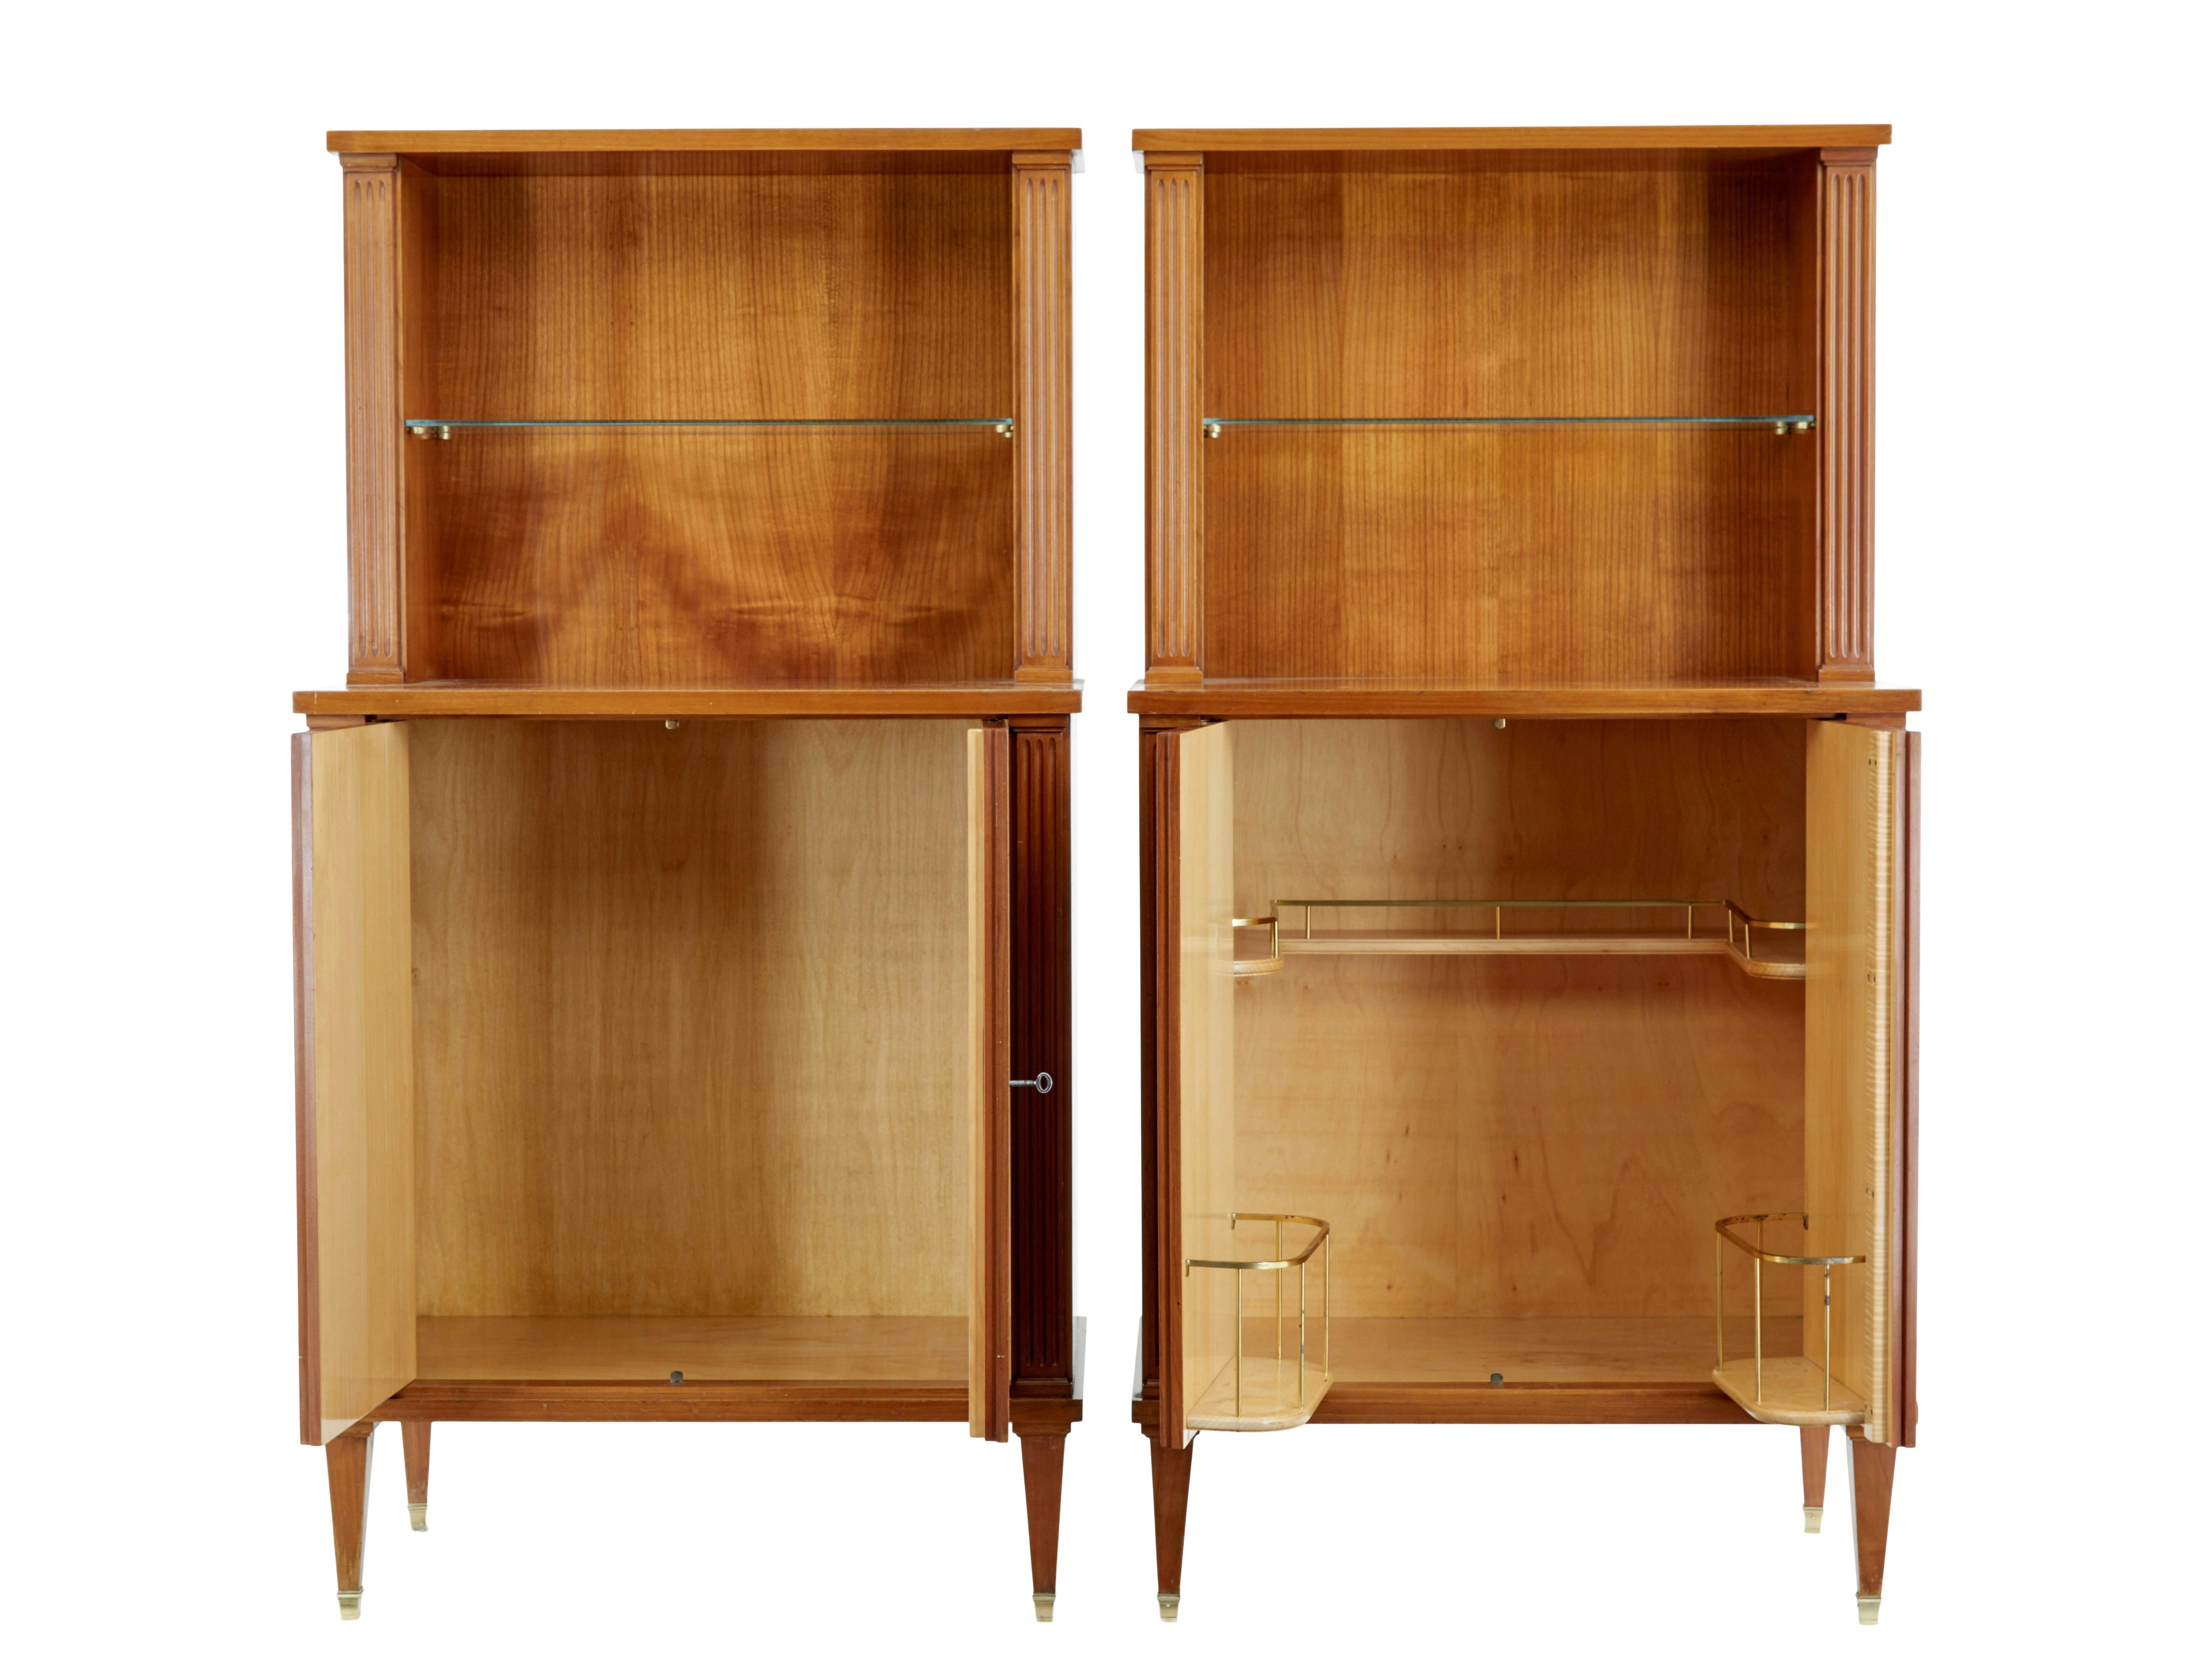 Pair of mid century Scandinavian elm cabinets circa 1950.

Very good quality pair of elm cabinets, with empire and art deco influences.

Each made in 1 piece, both feature and open aperture with a single glass shelf held in place by brass brackets. 